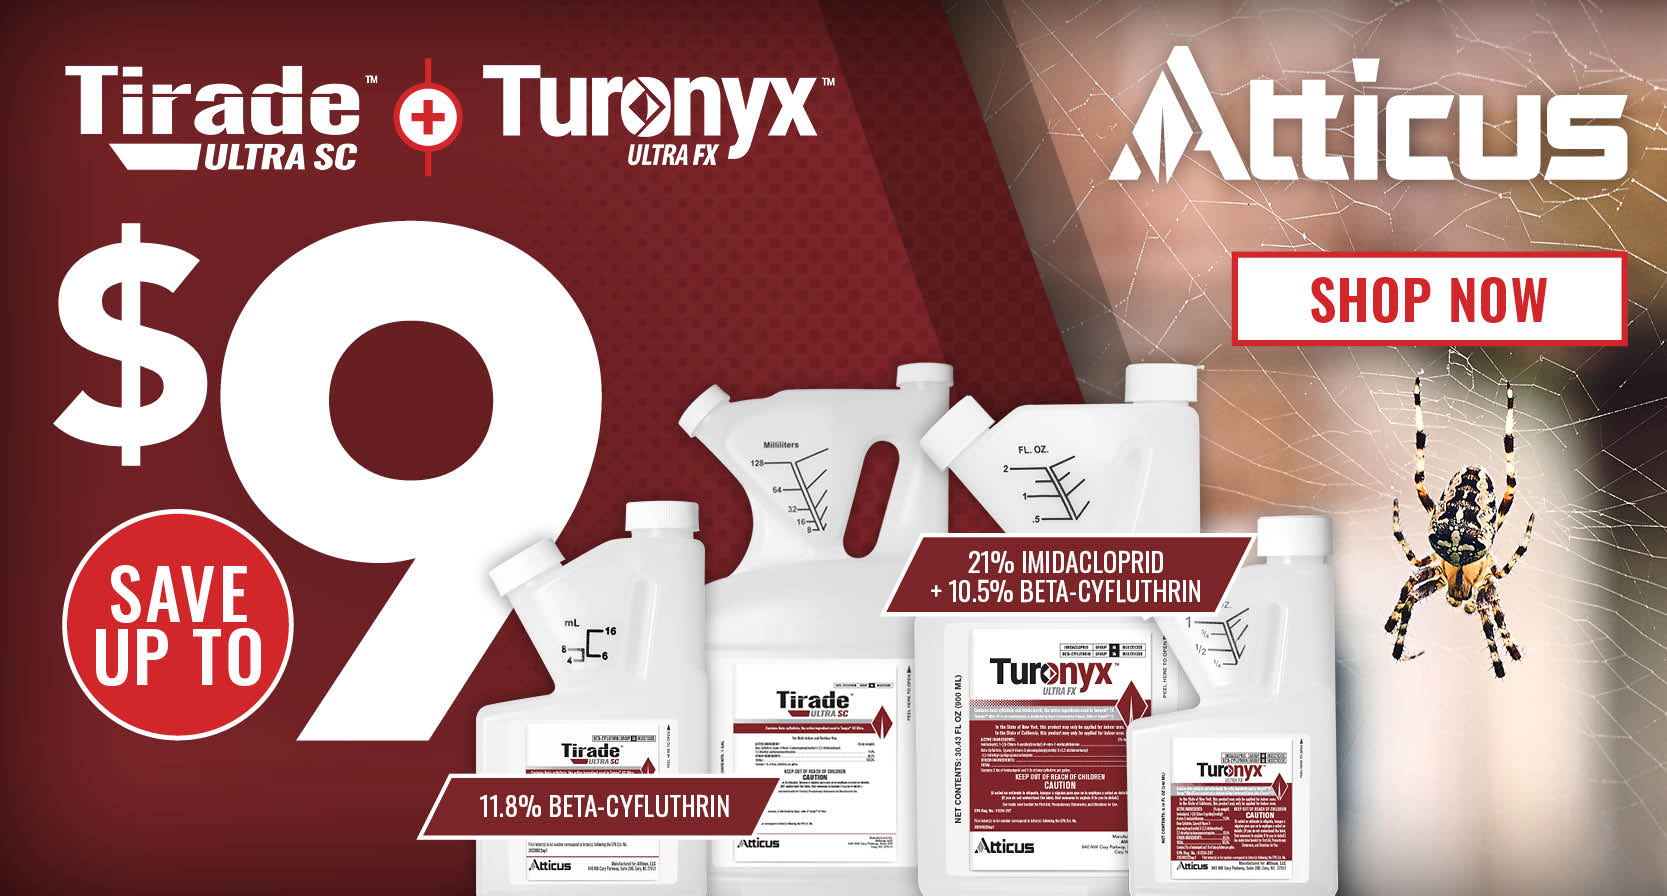 Save up to $9 Off Tirade Ultra SC and Turonyx Ultra FX